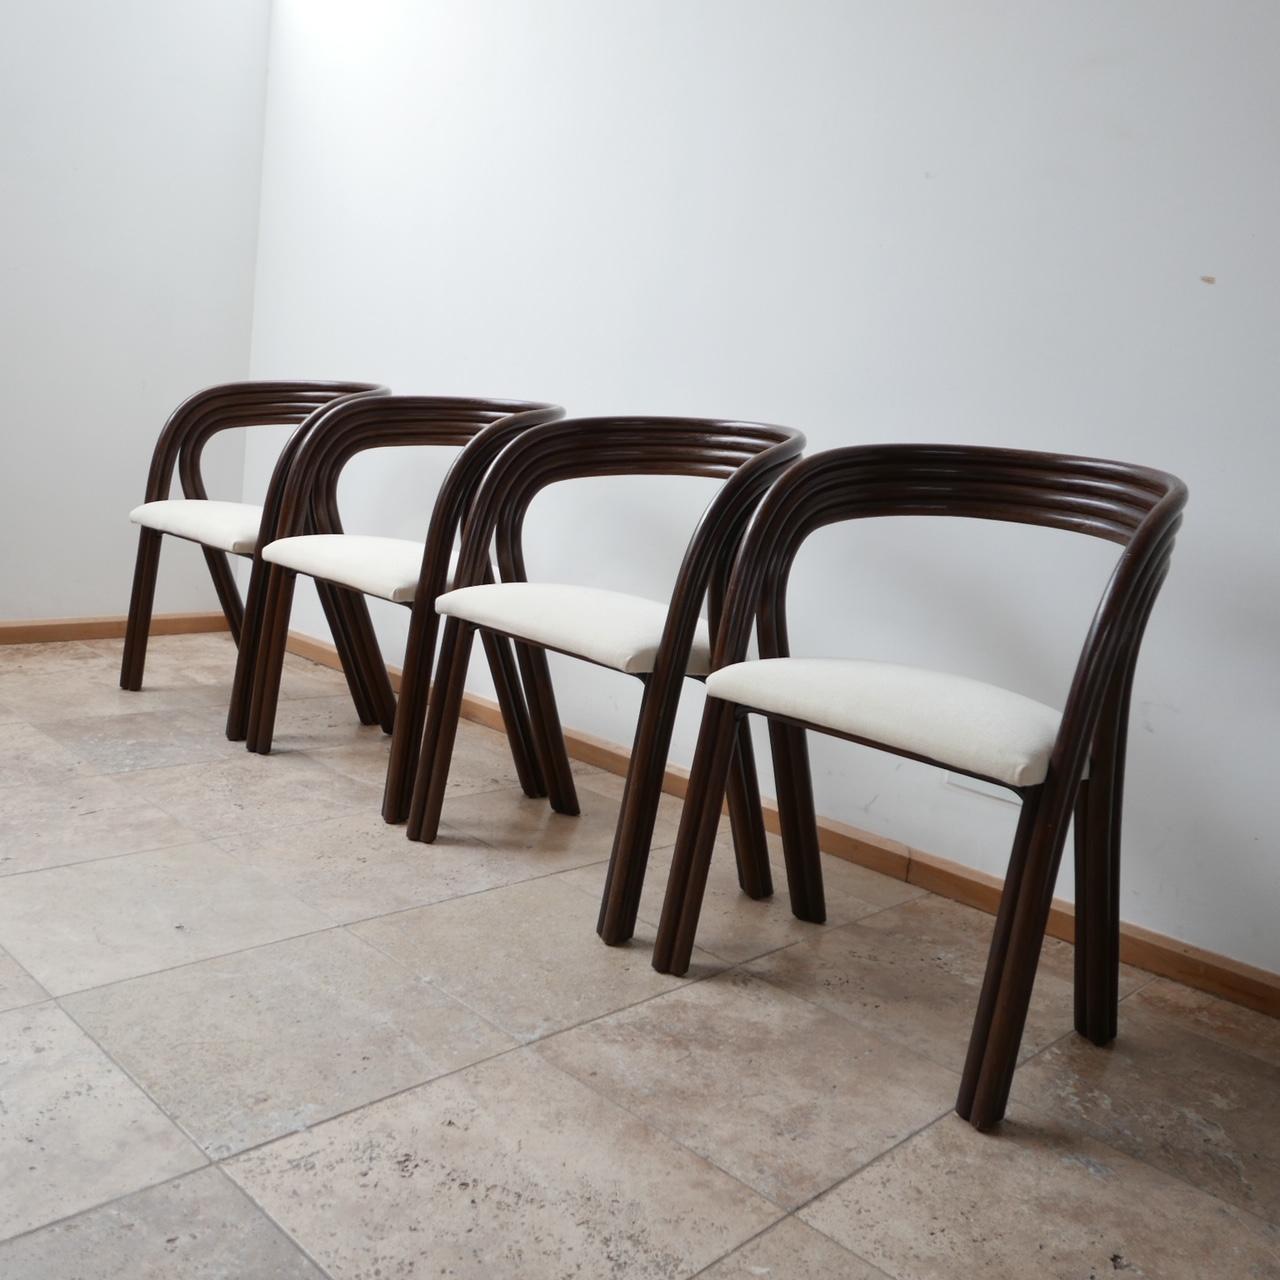 axel enthoven chairs